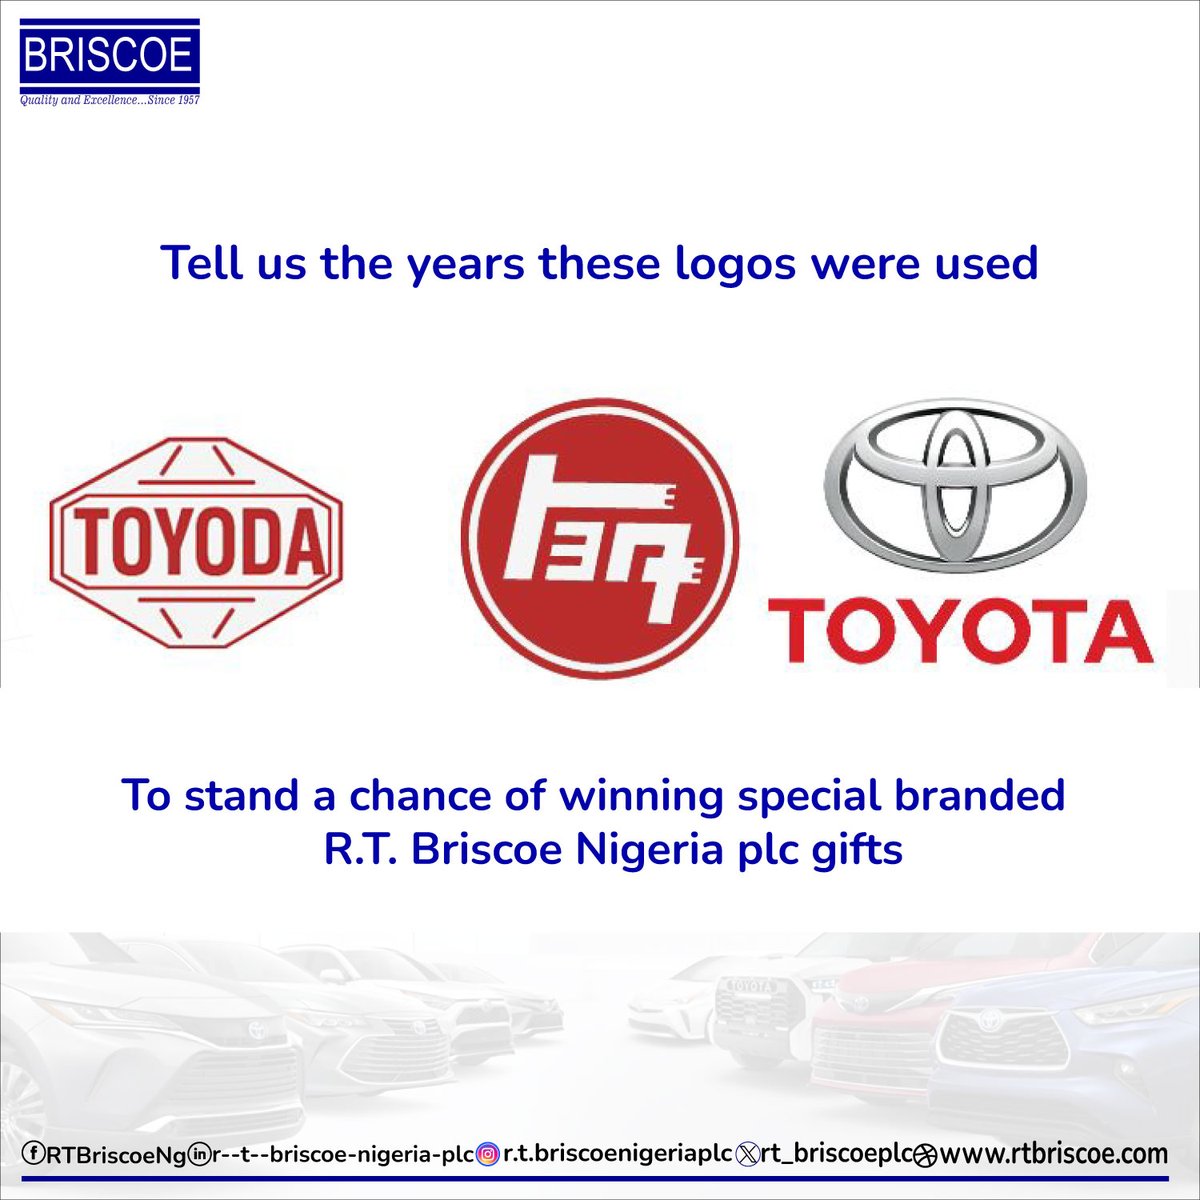 Tell us the years these logos were used by Toyota to stand a chance of winning special branded R.T. Briscoe Nigeria Plc gifts.

#toyota #rtbriscoenigeriaplc #brand #brandidentity #thursday #tbt #followforfollowback #growth #follow